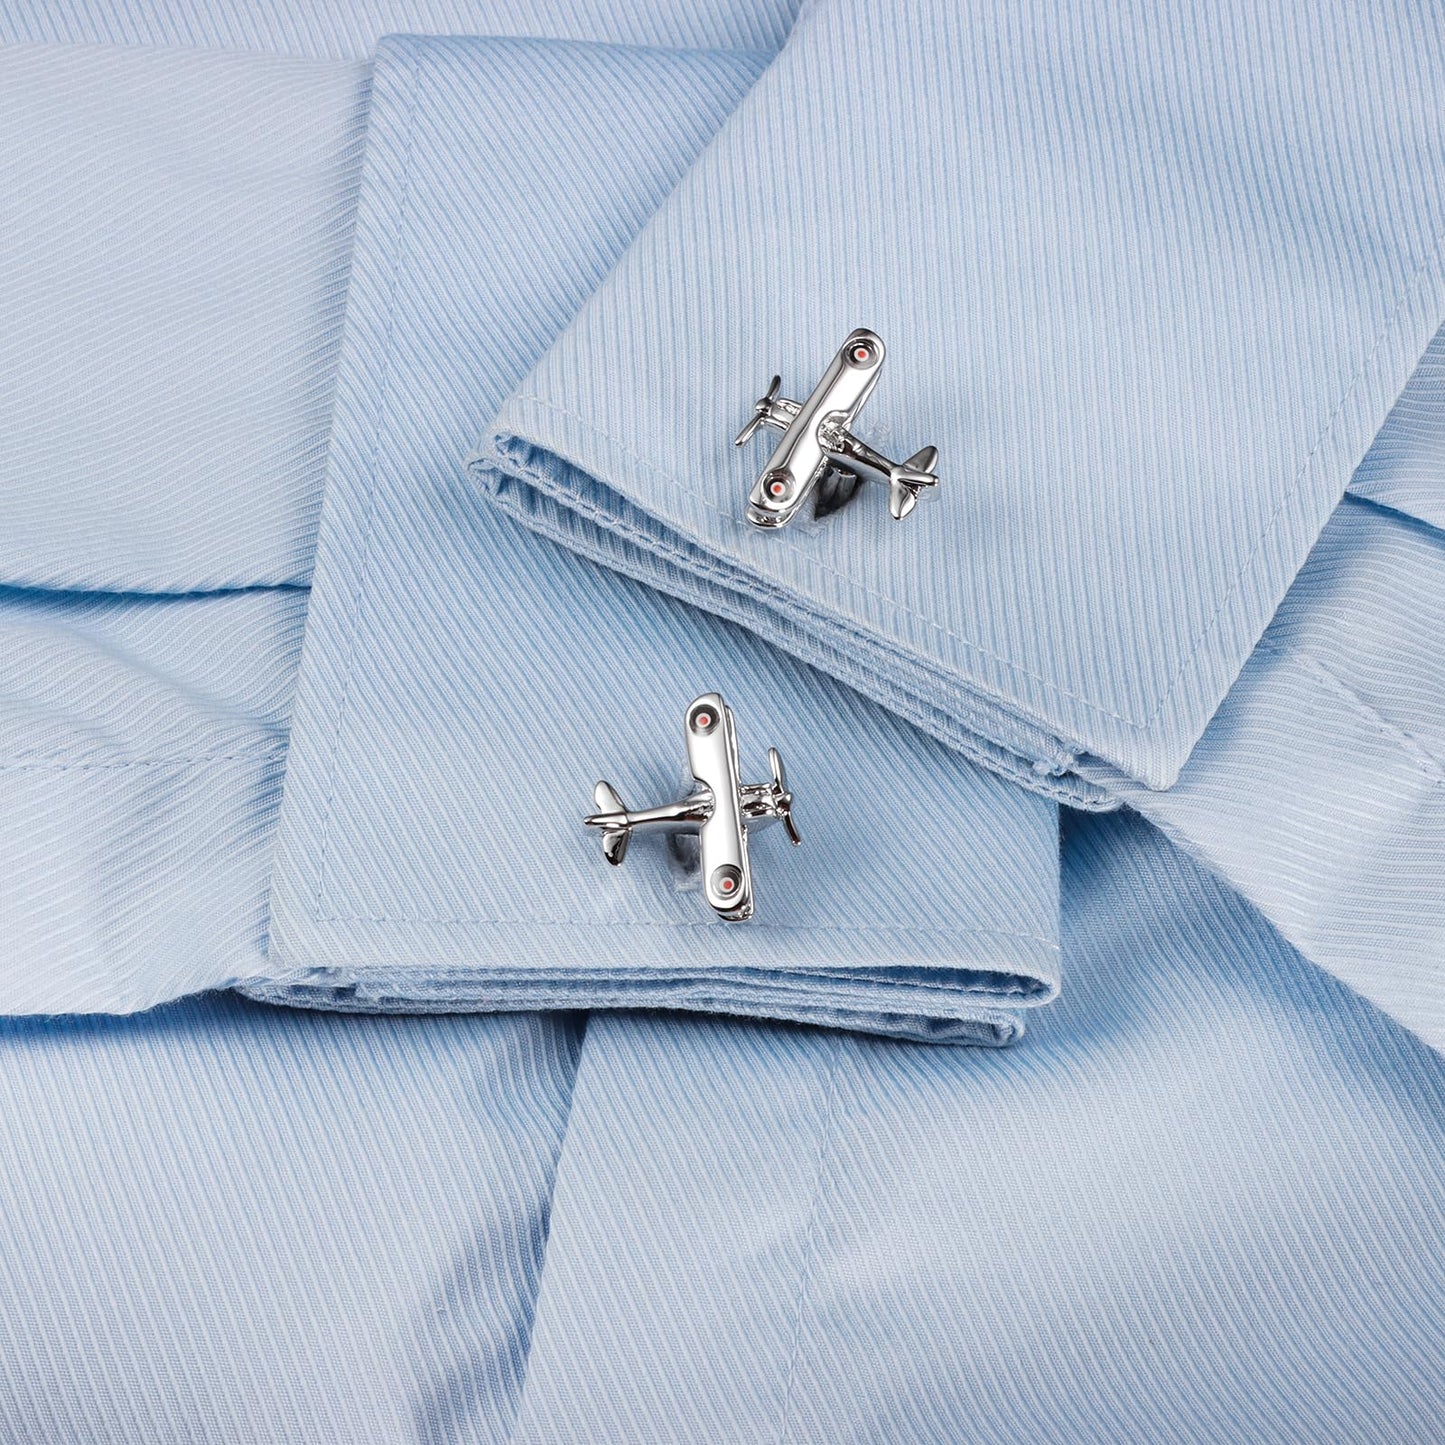 Airplane Cufflinks For Men With Gift Box